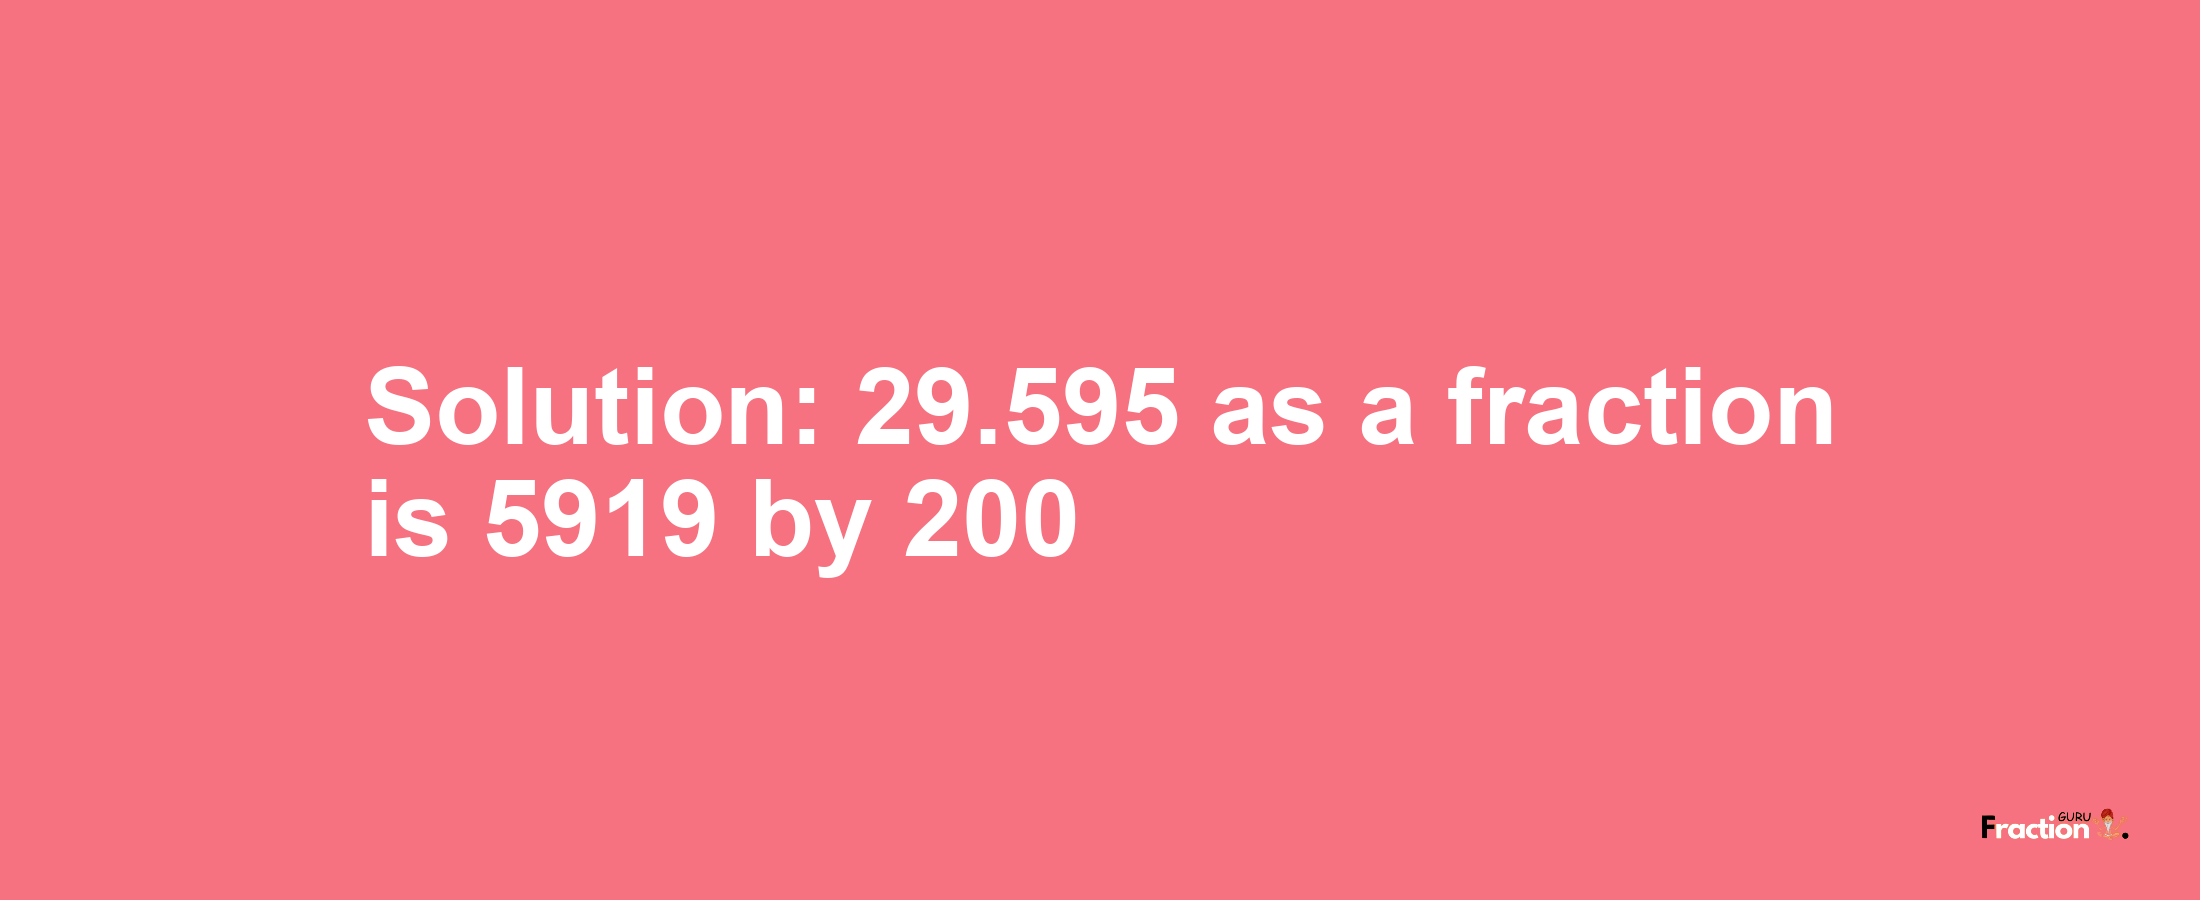 Solution:29.595 as a fraction is 5919/200